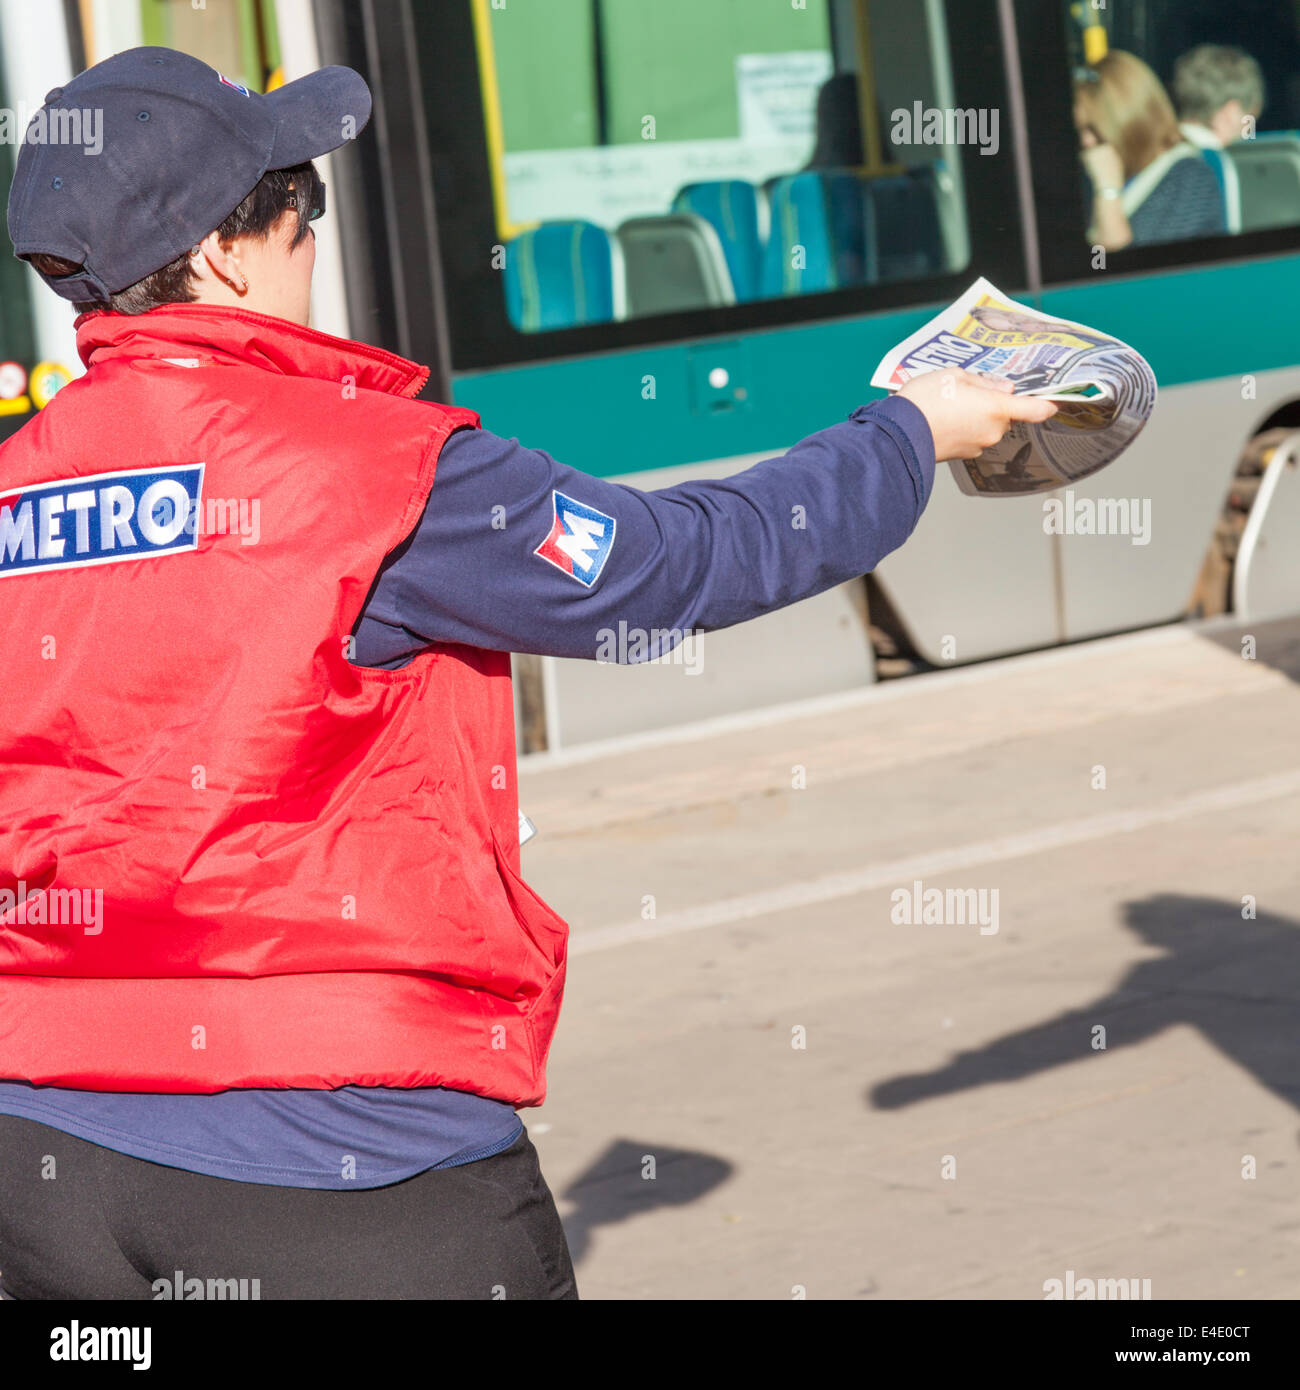 Metro newspaper distributor giving out free newspapers, Nottingham, England, UK Stock Photo